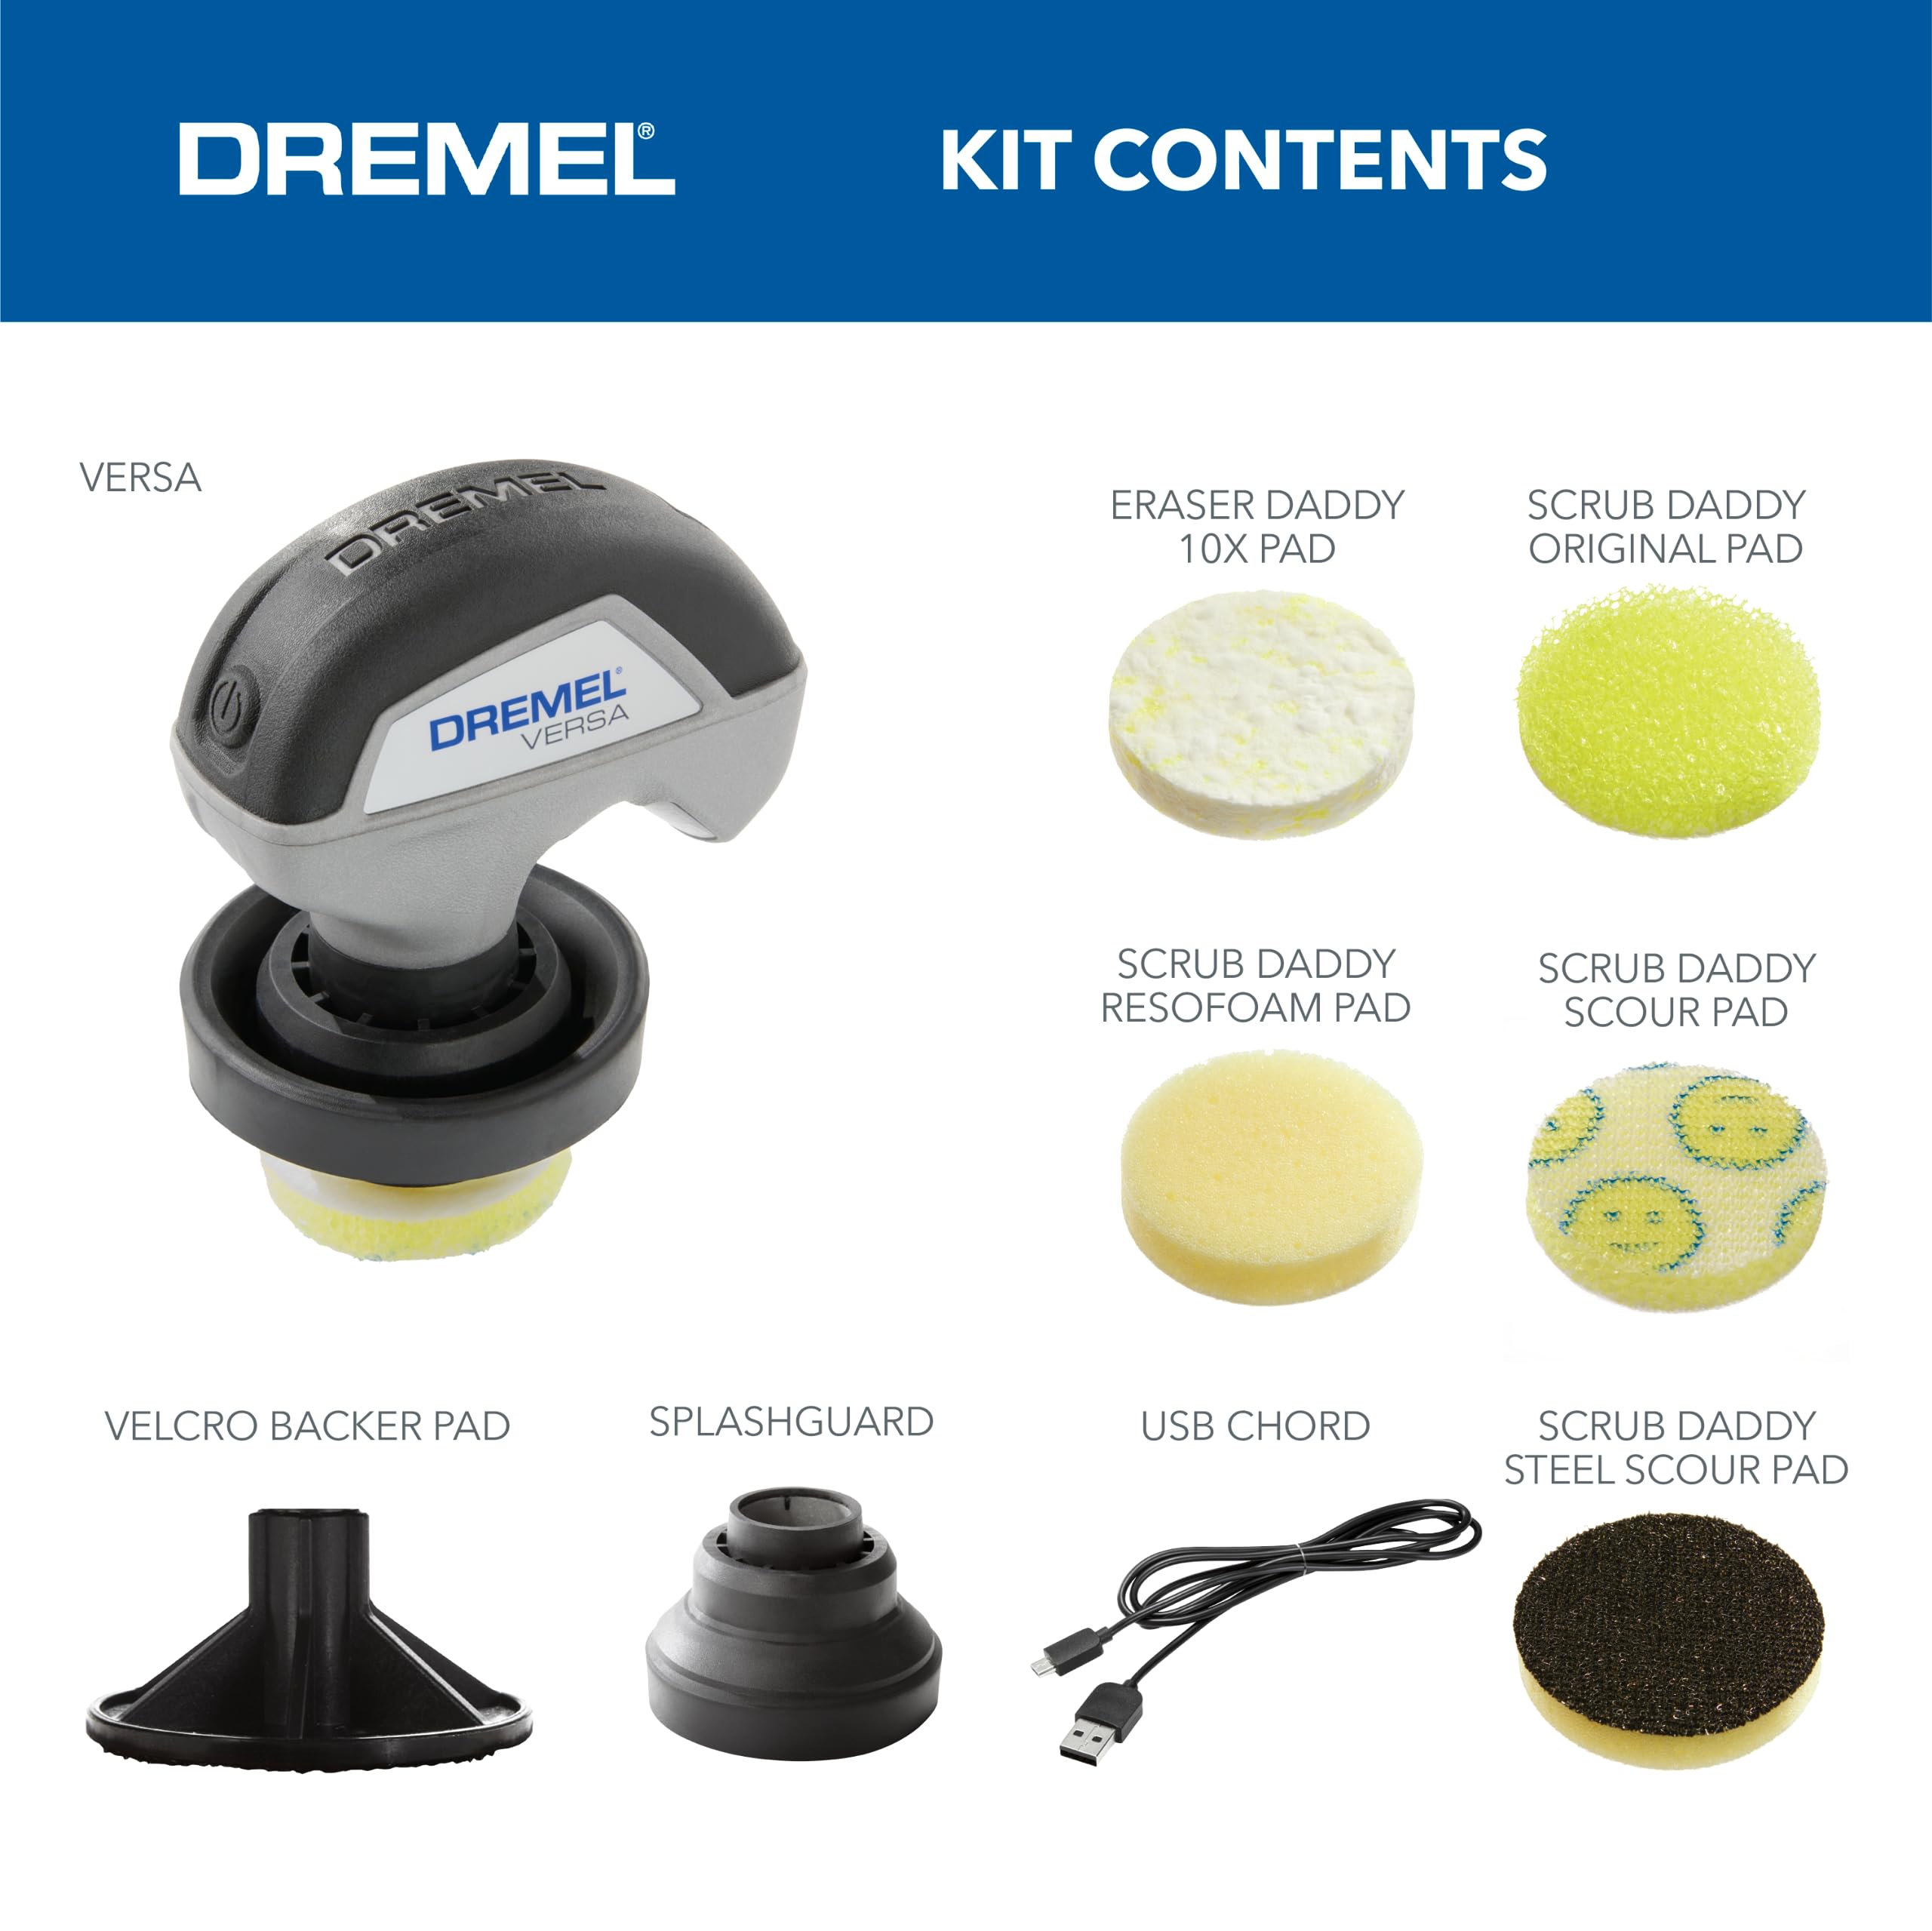 Dremel Versa Power Scrubber Kit with 5 Scrub Daddy Cleaning Sponge Pads – Waterproof Cordless Electric Spin Scrubber, High Speed, Multi-Surface Cleaning for Kitchen, Household, and Bathroom, PC10-07